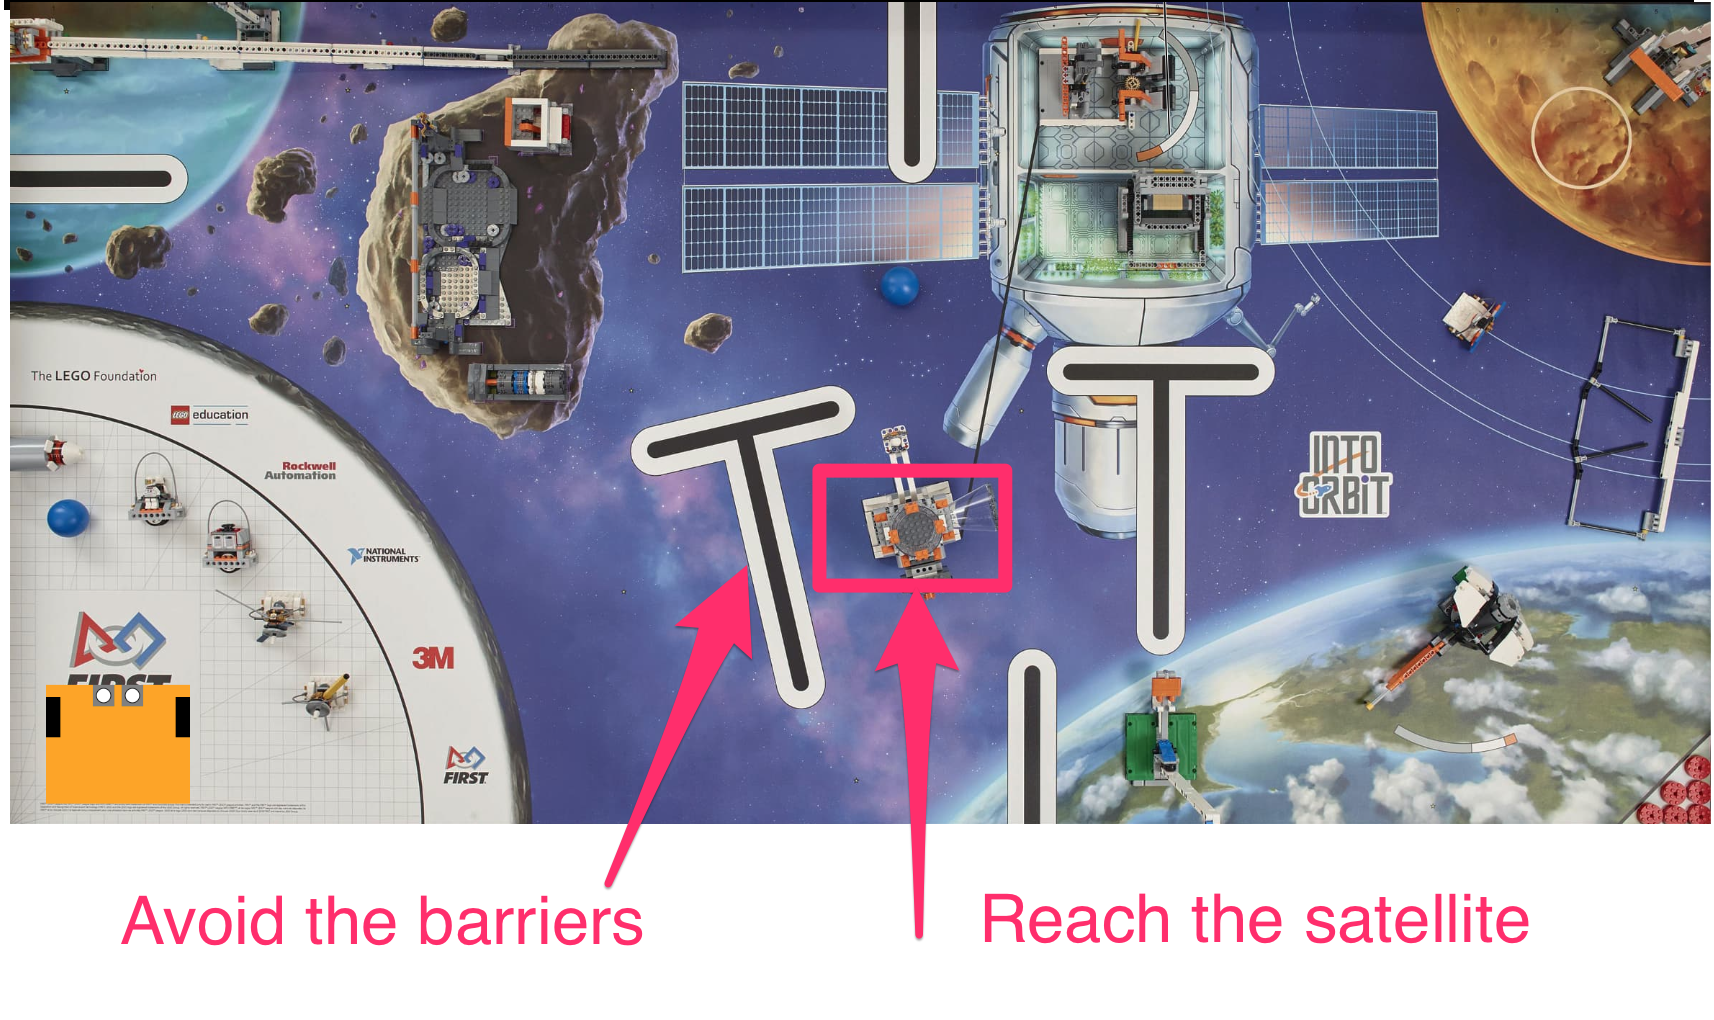 Space scene showing the robot, some satellites against a ‘space’ background, and some wall-like obstacles between the robot’s starting point and a target satellite.